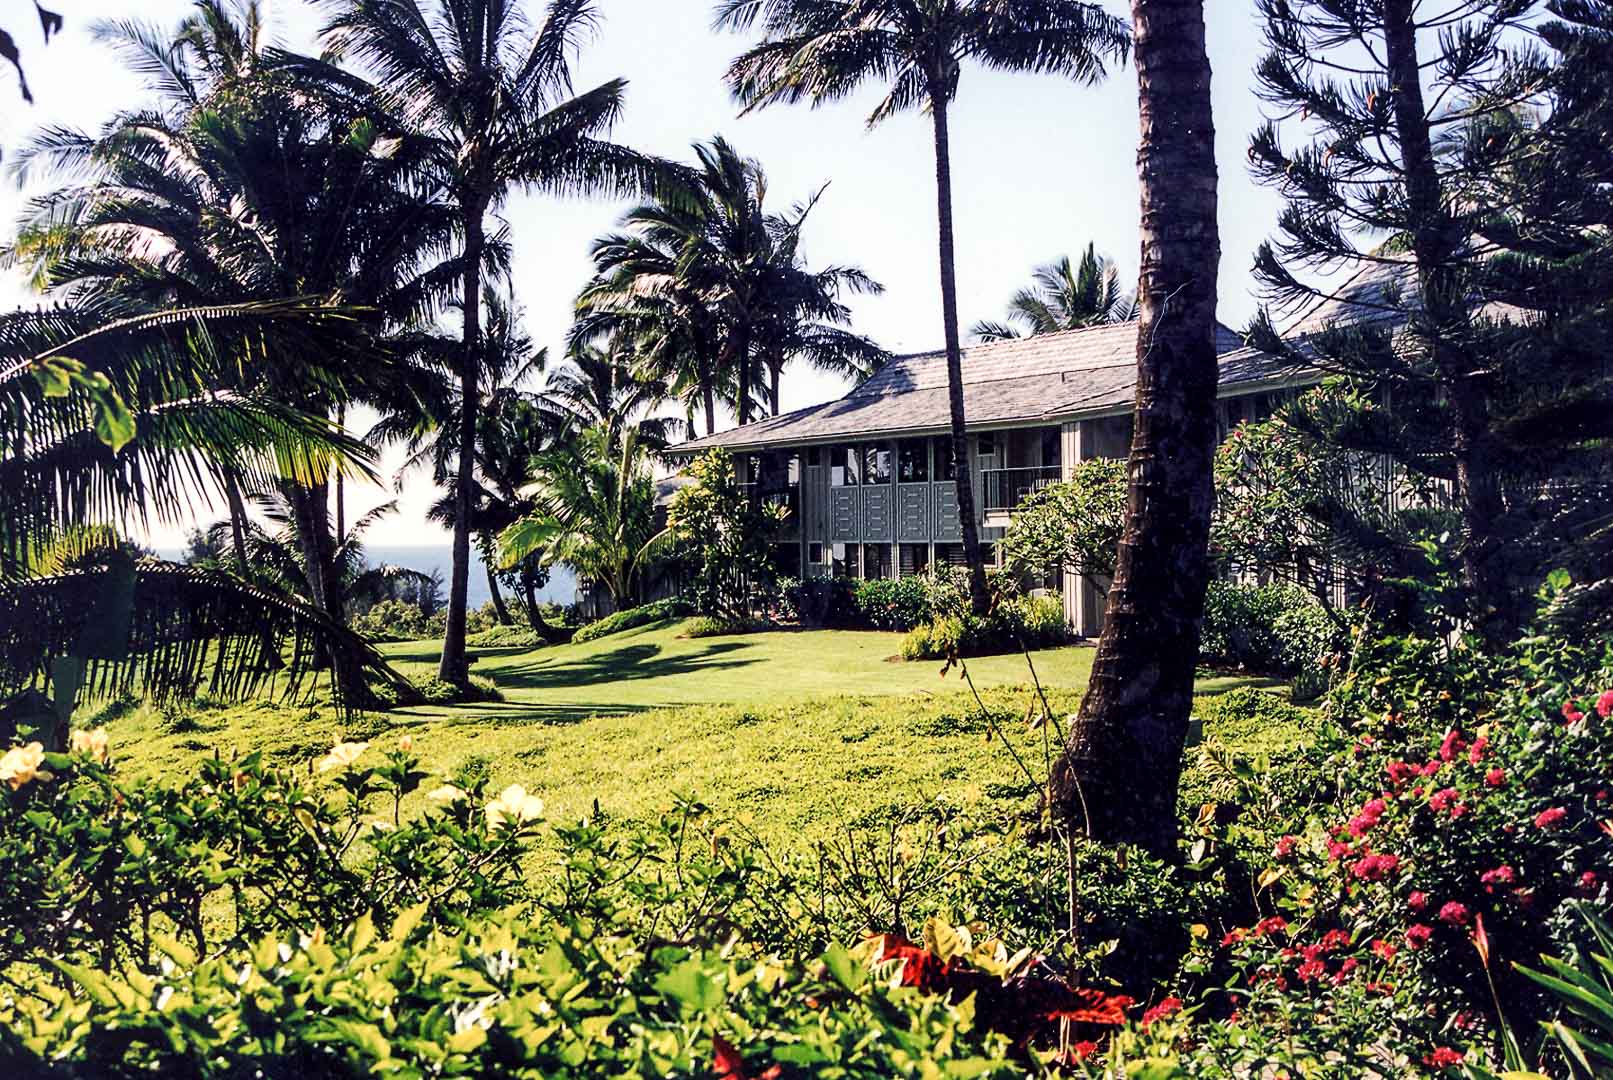 The colorful landscape at VRI's Alii Kai Resort in Hawaii